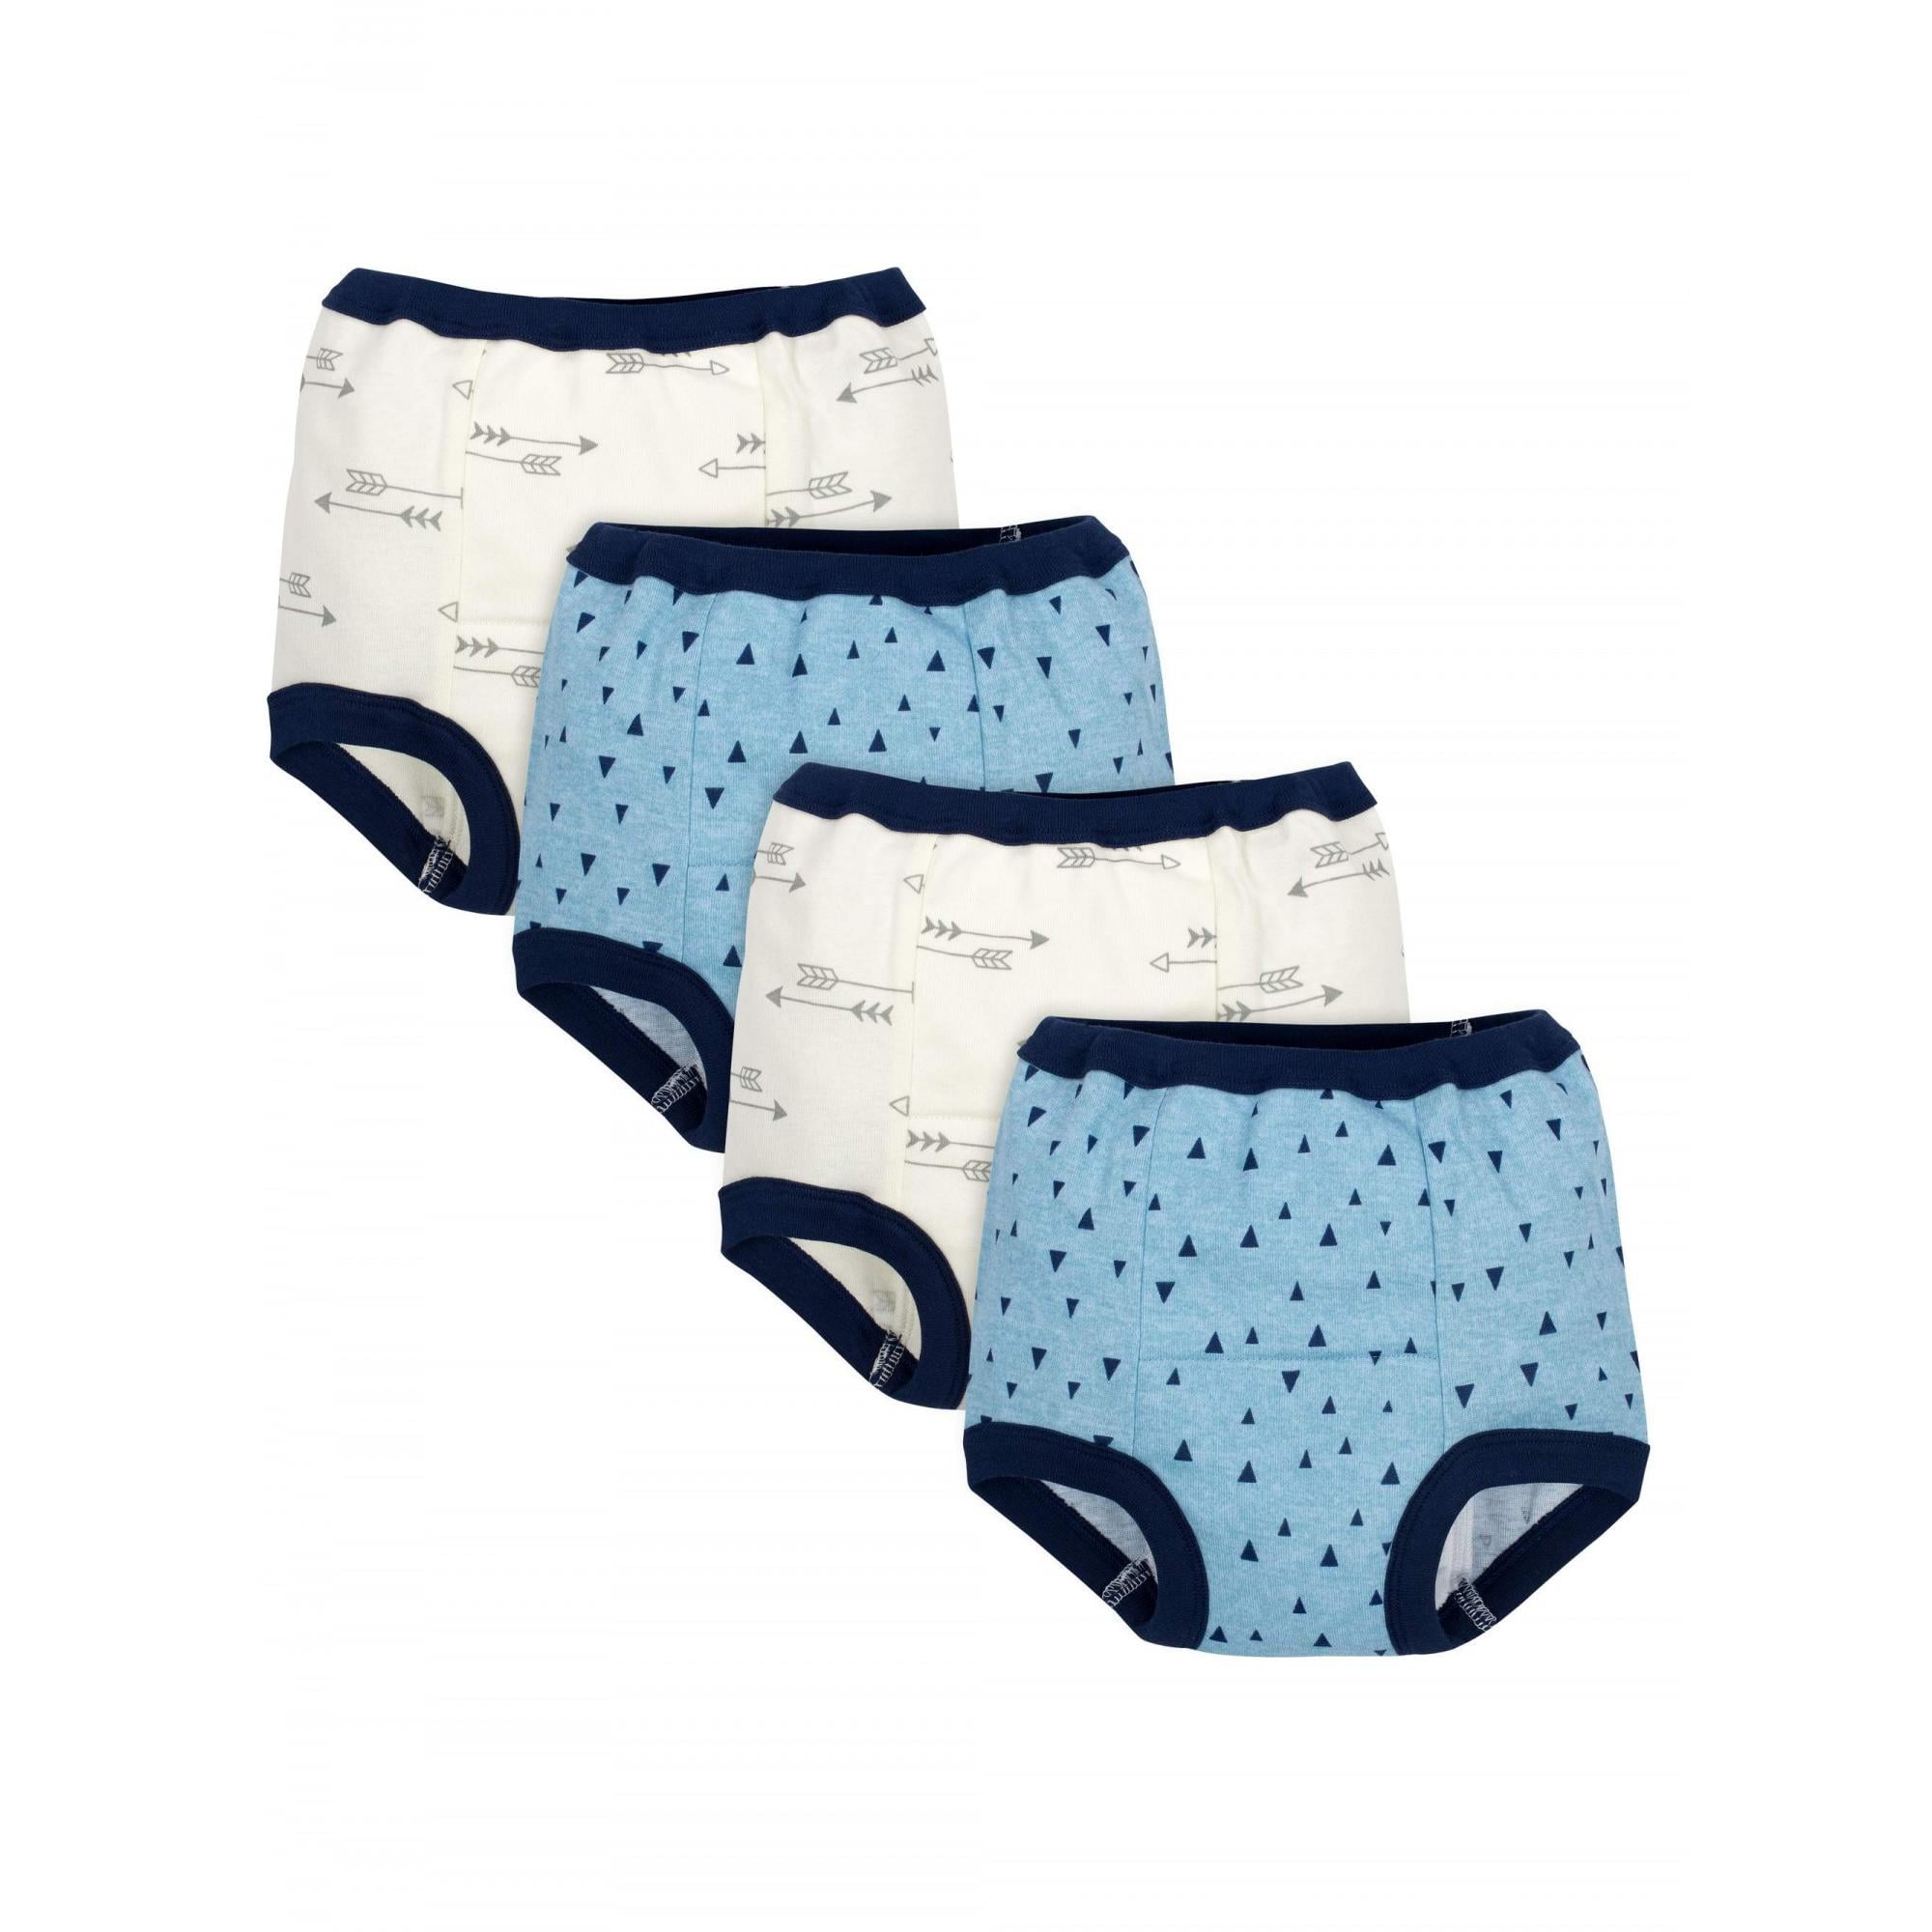 Gerber Baby Boys' Infant Toddler 4 Pack Potty Training Pants Underwear 2T  Explore 